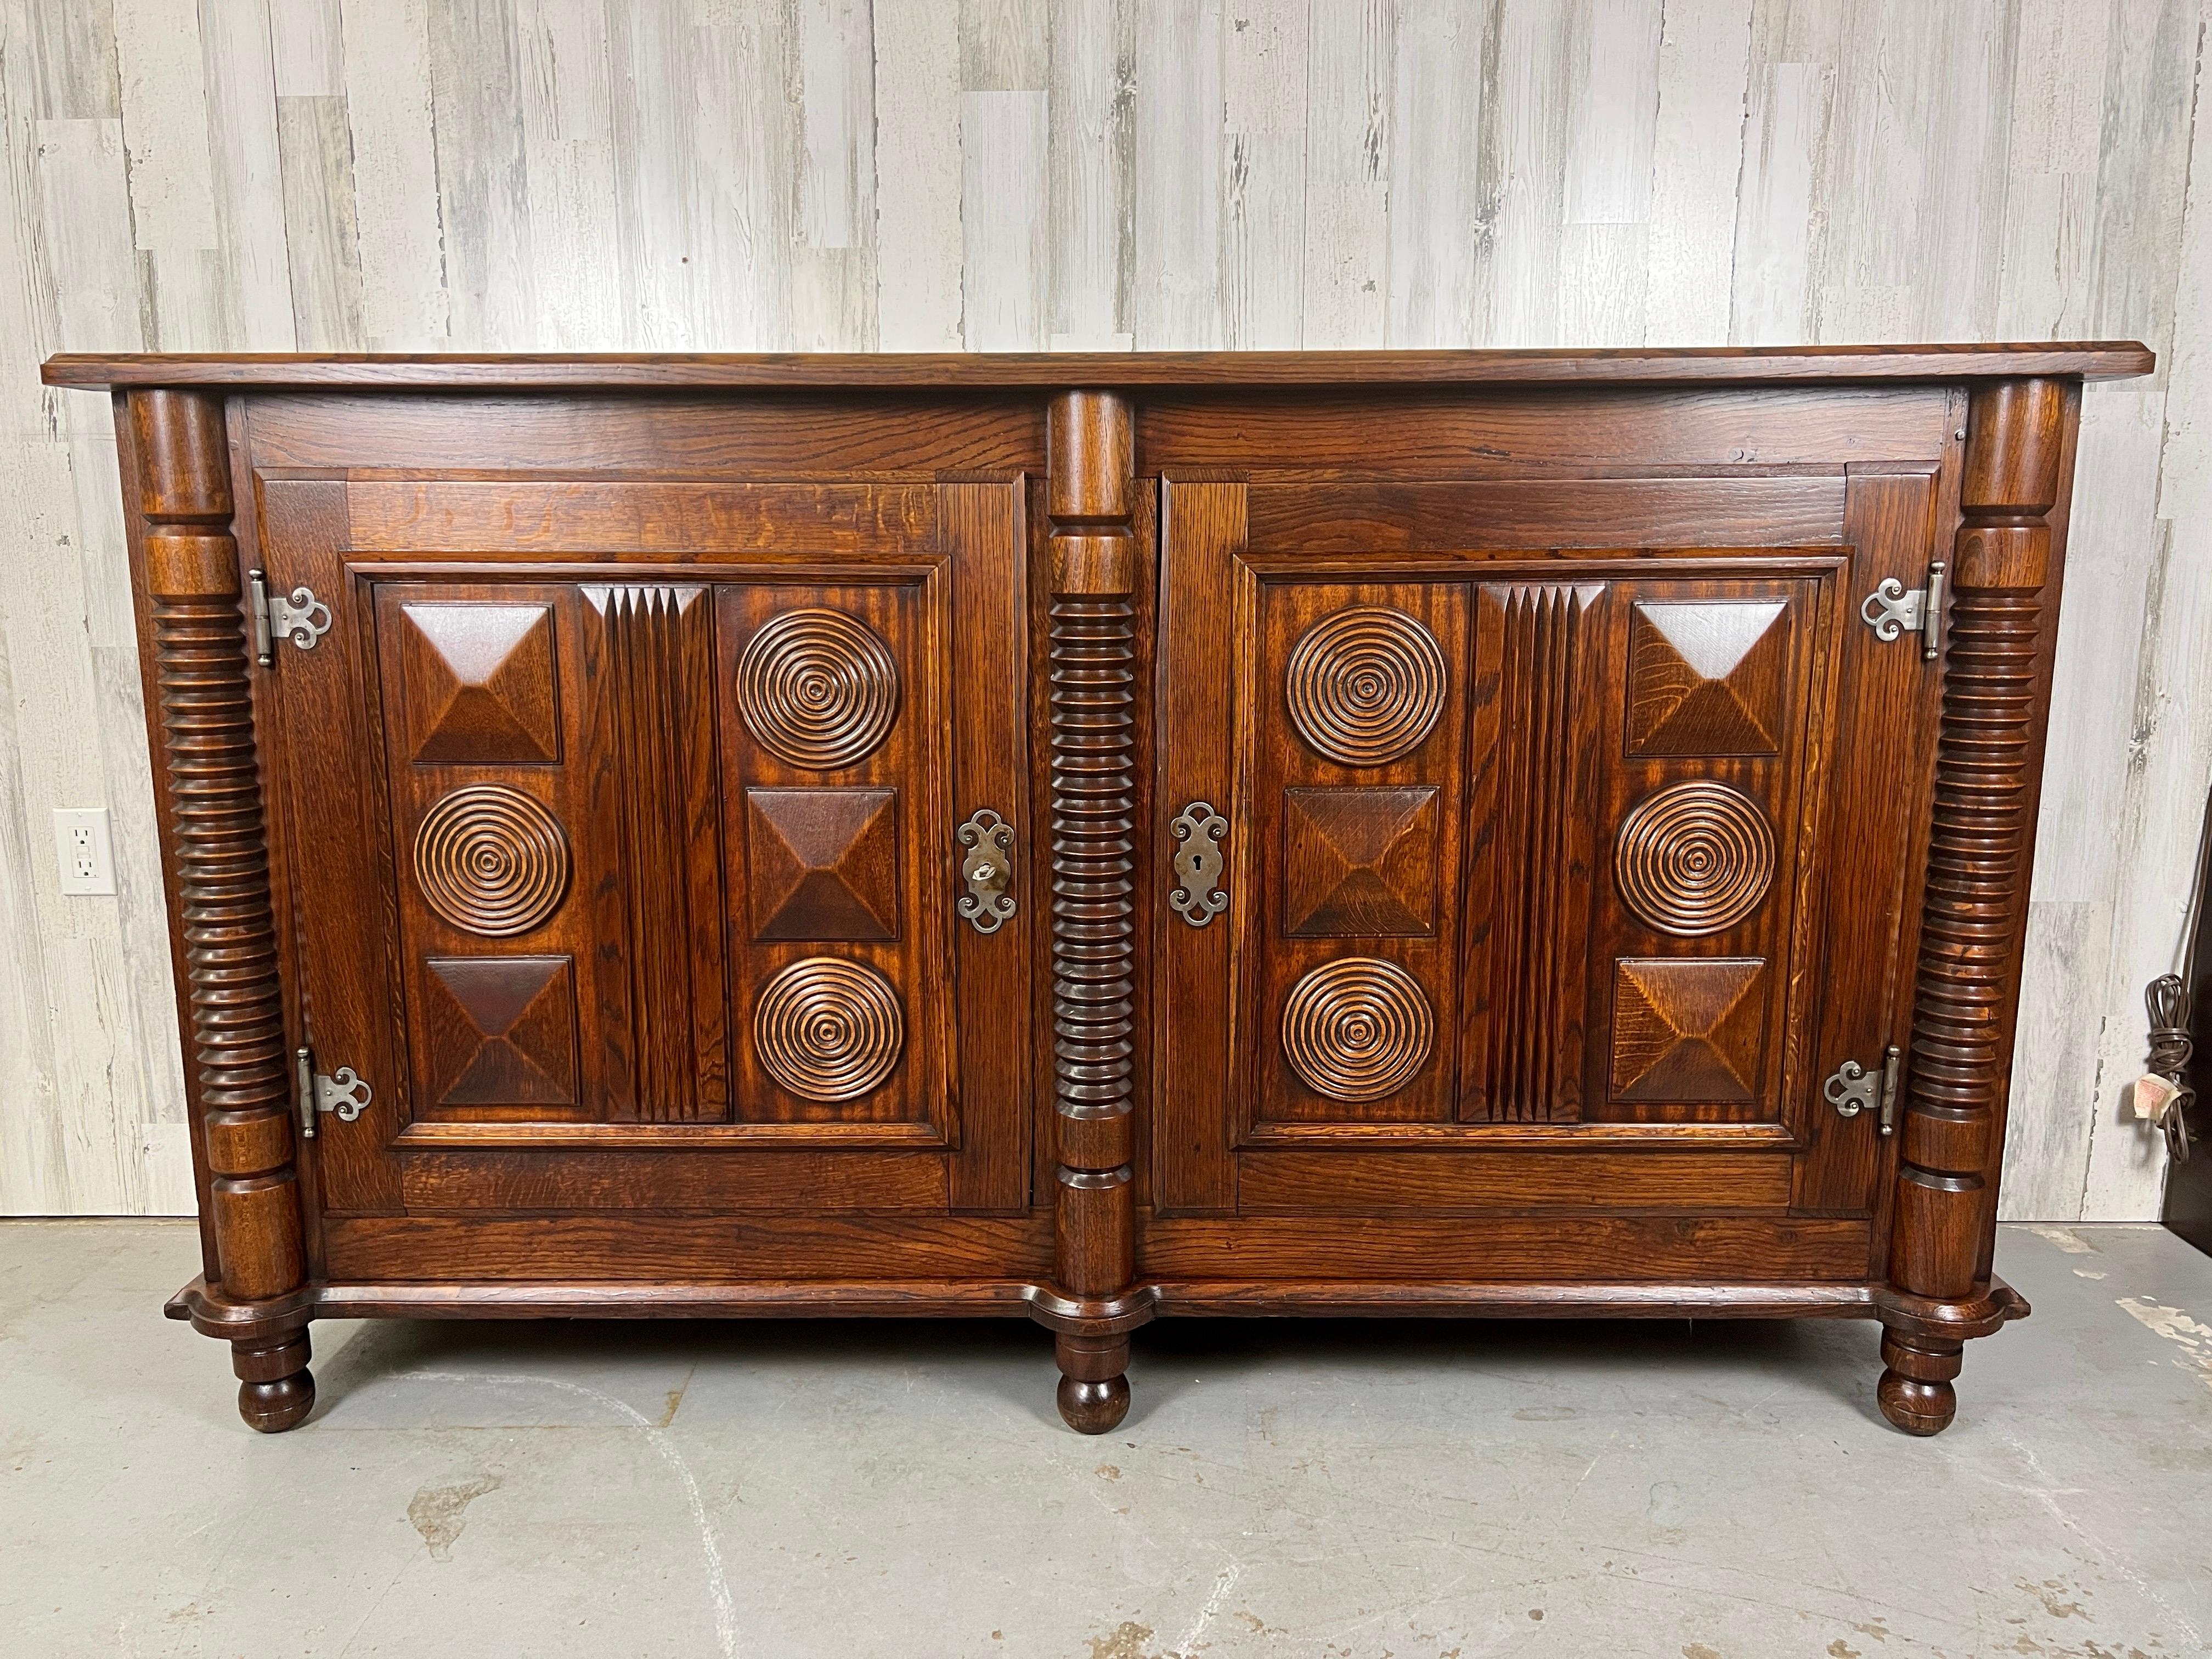 Stunning French Deco sideboard with geometric design on the doors and machine age turned columns flanking the two doors that open to two adjustable shelves. Other design features Nickel plated hinges and Escutcheons , Mortise and Tenon joints with